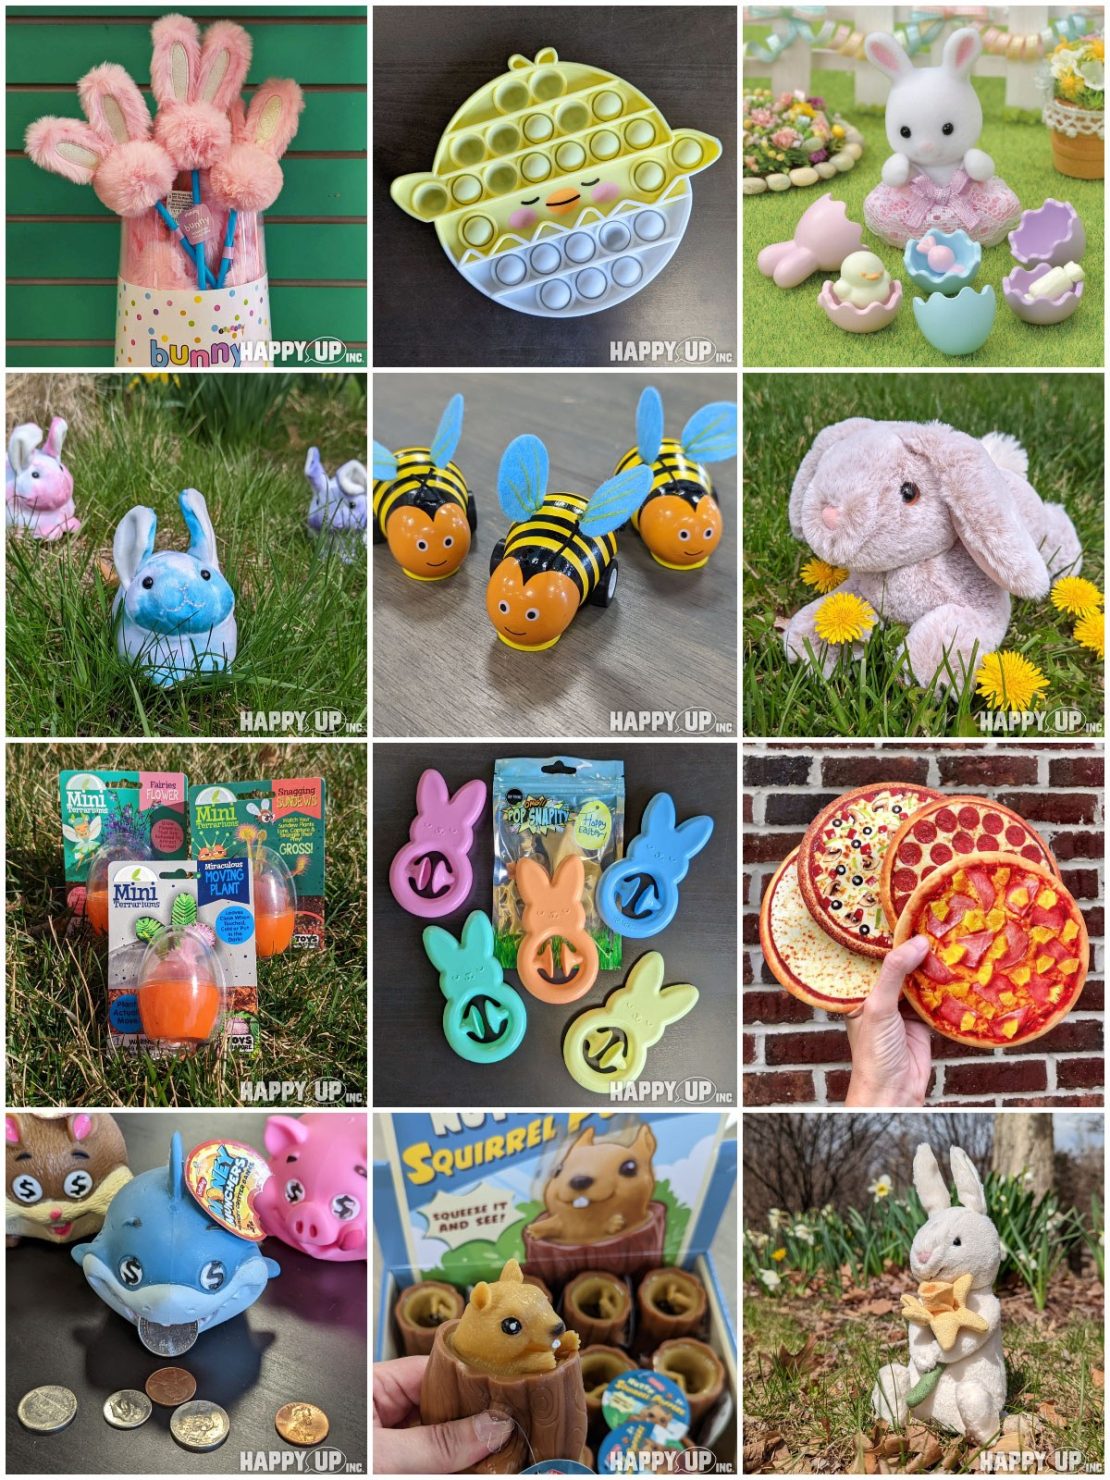 A whole slew of gifty things for Easter!